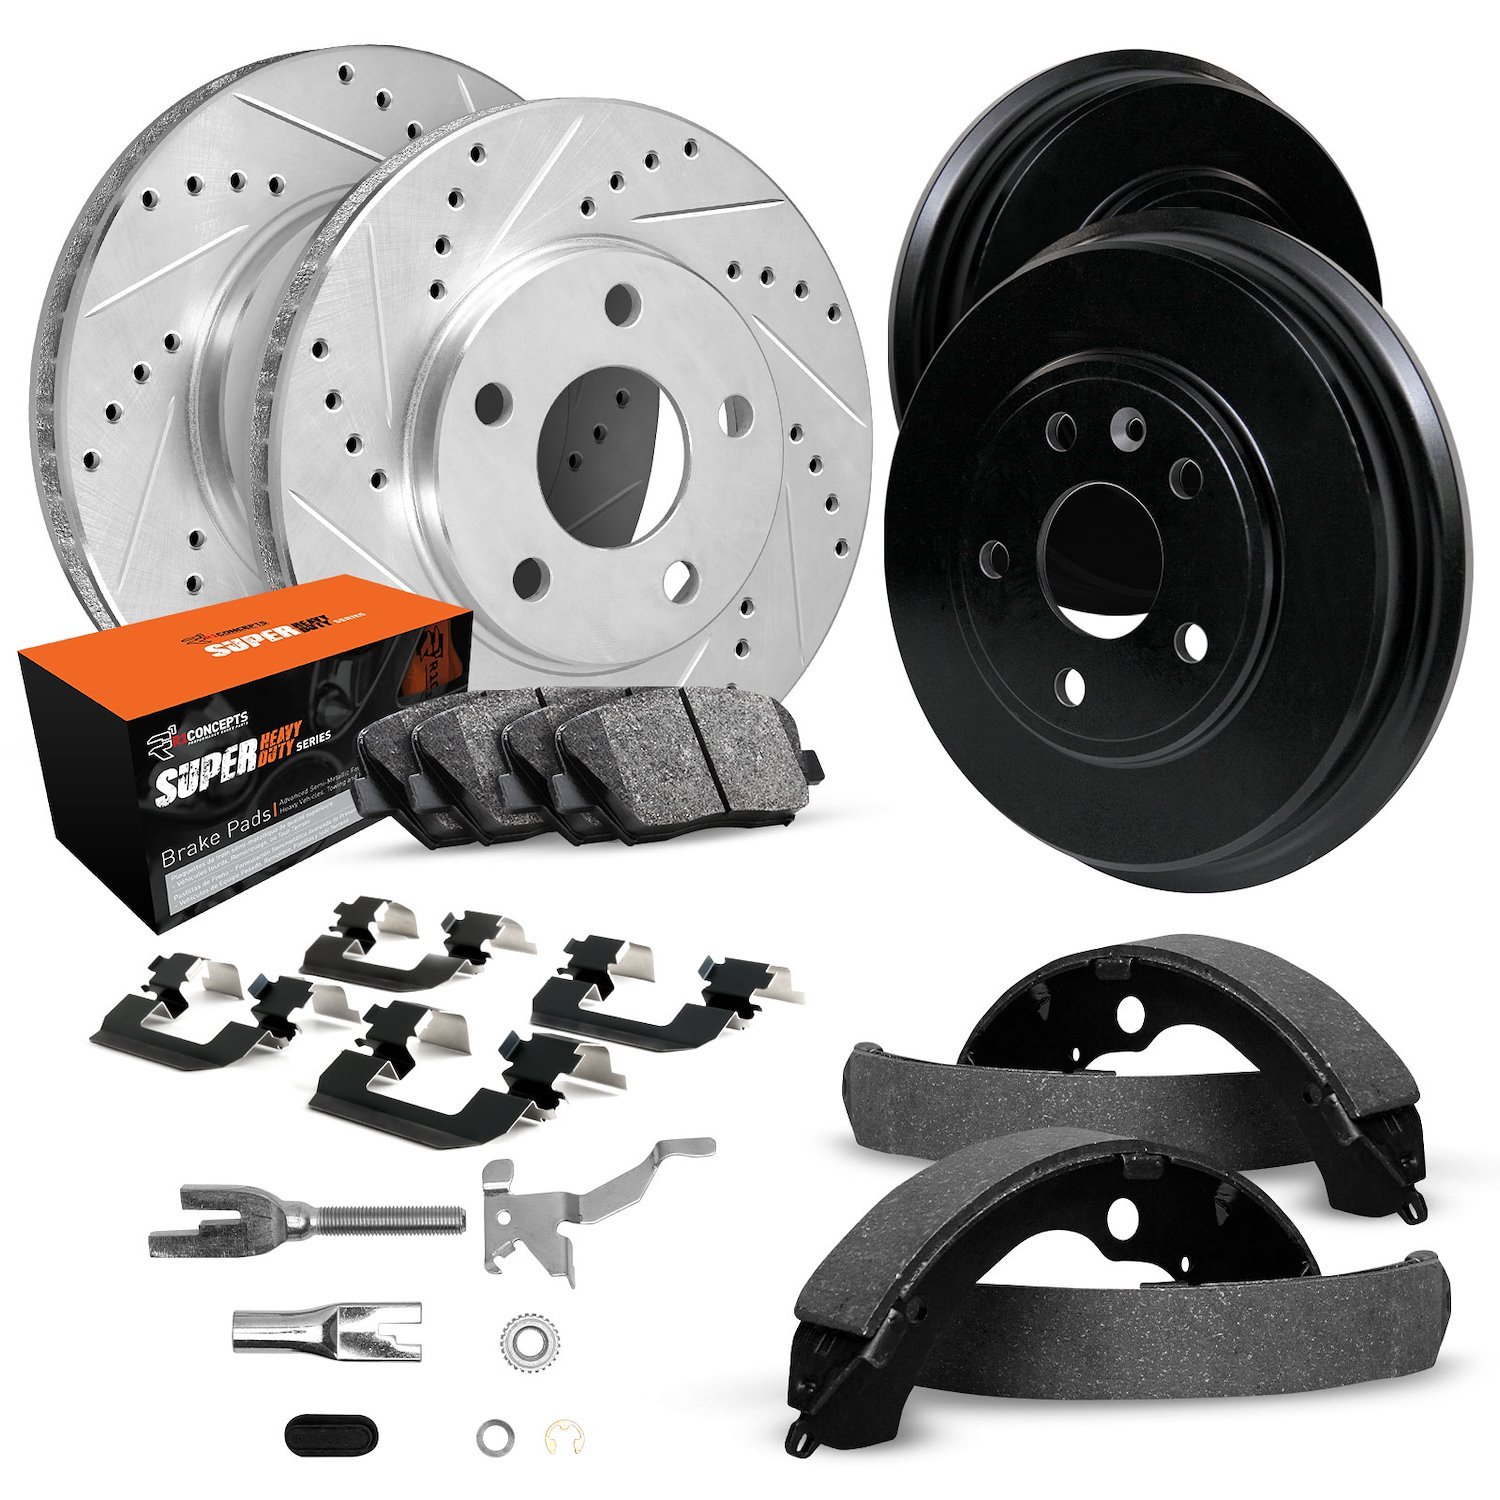 E-Line Drilled/Slotted Silver Rotor & Drum Set w/Super-Duty Pads, Shoes/Hardware/Adjusters, 1998-1998 Mopar